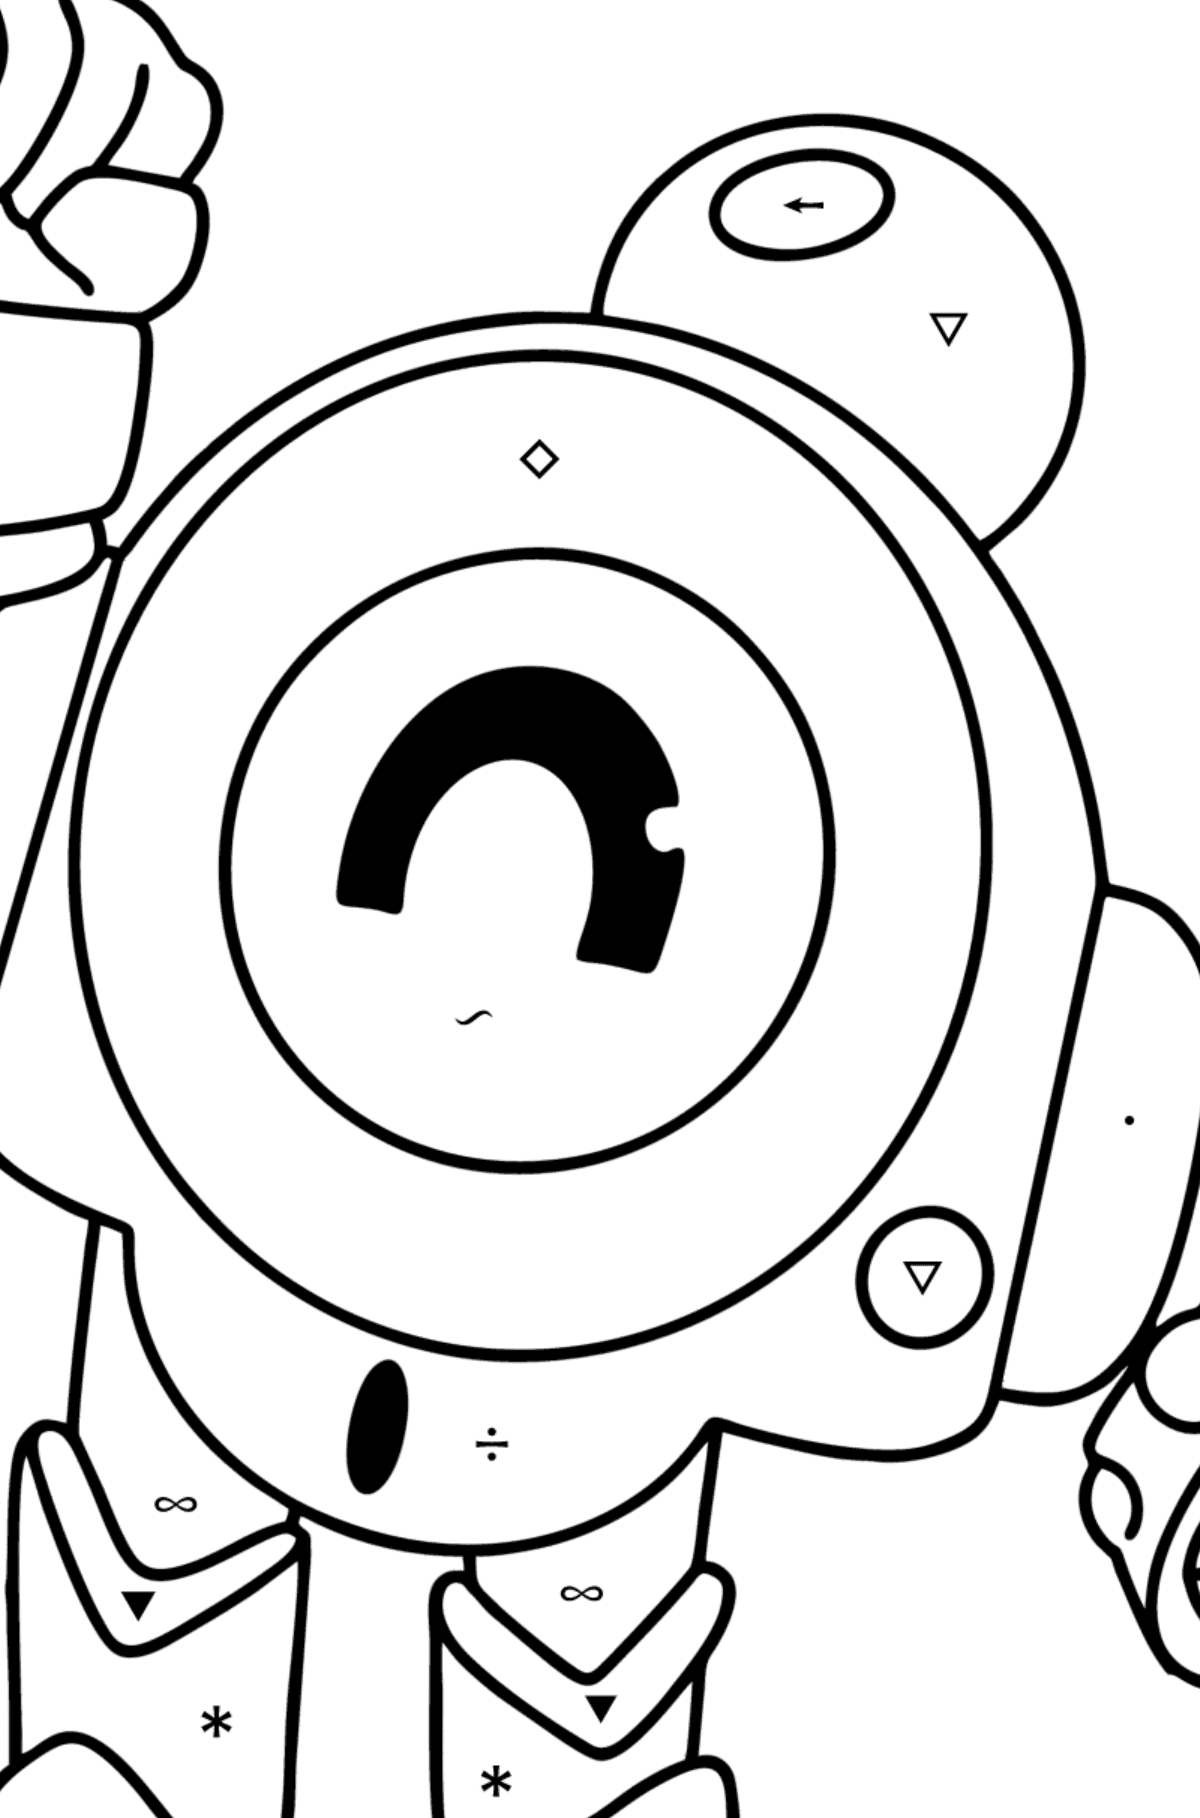 Brawl Stars Nani coloring page - Coloring by Symbols for Kids